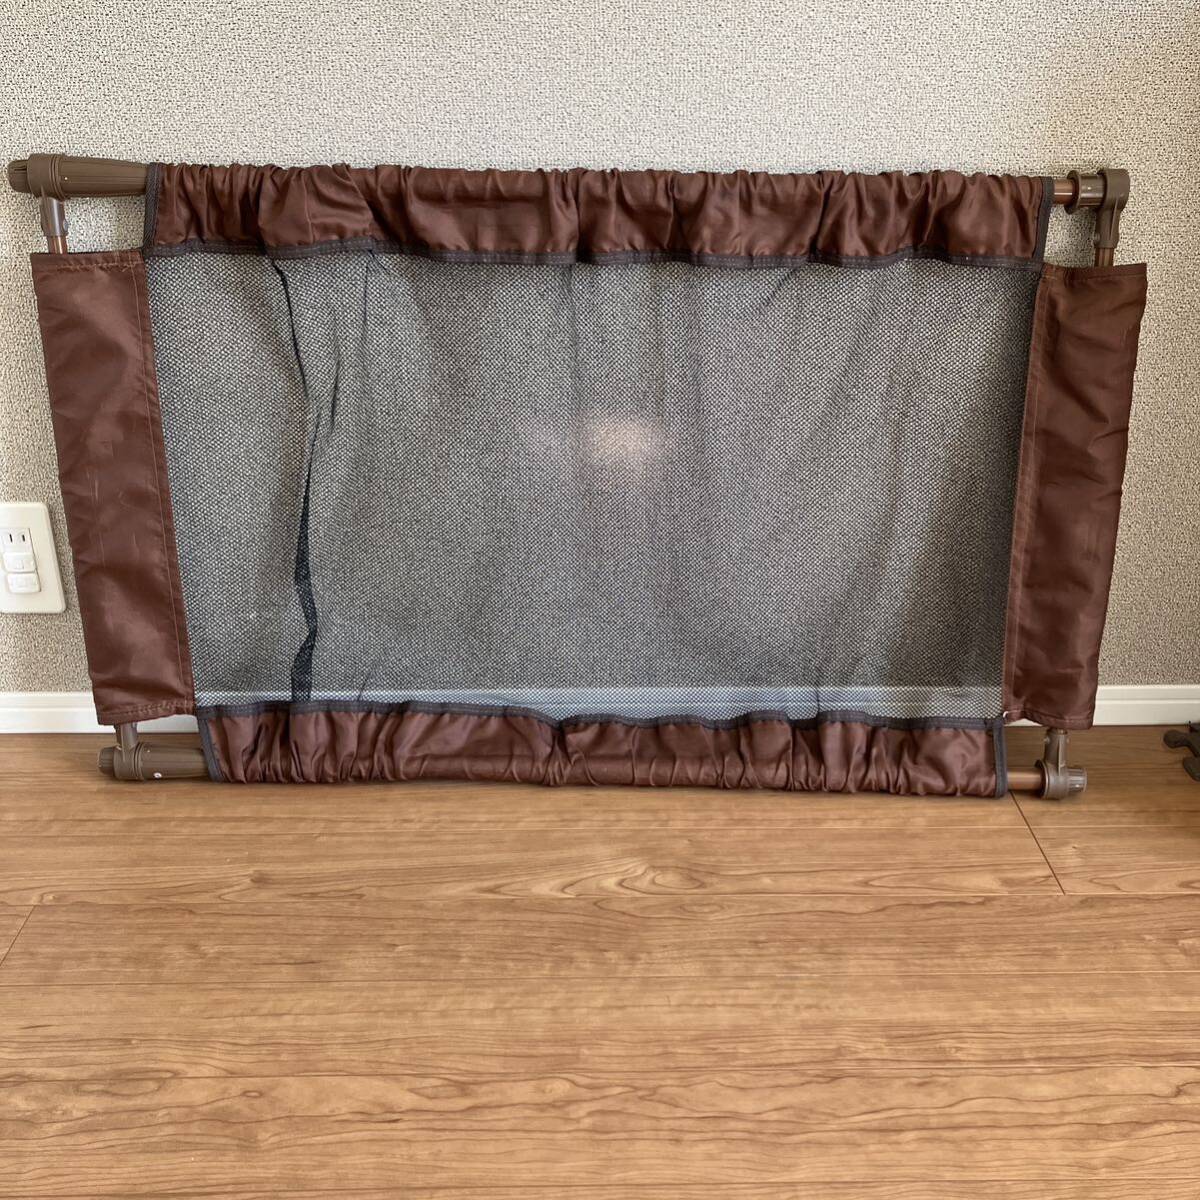  baby gate baby fence Brown baby baby guard west pine shop M a little with defect 